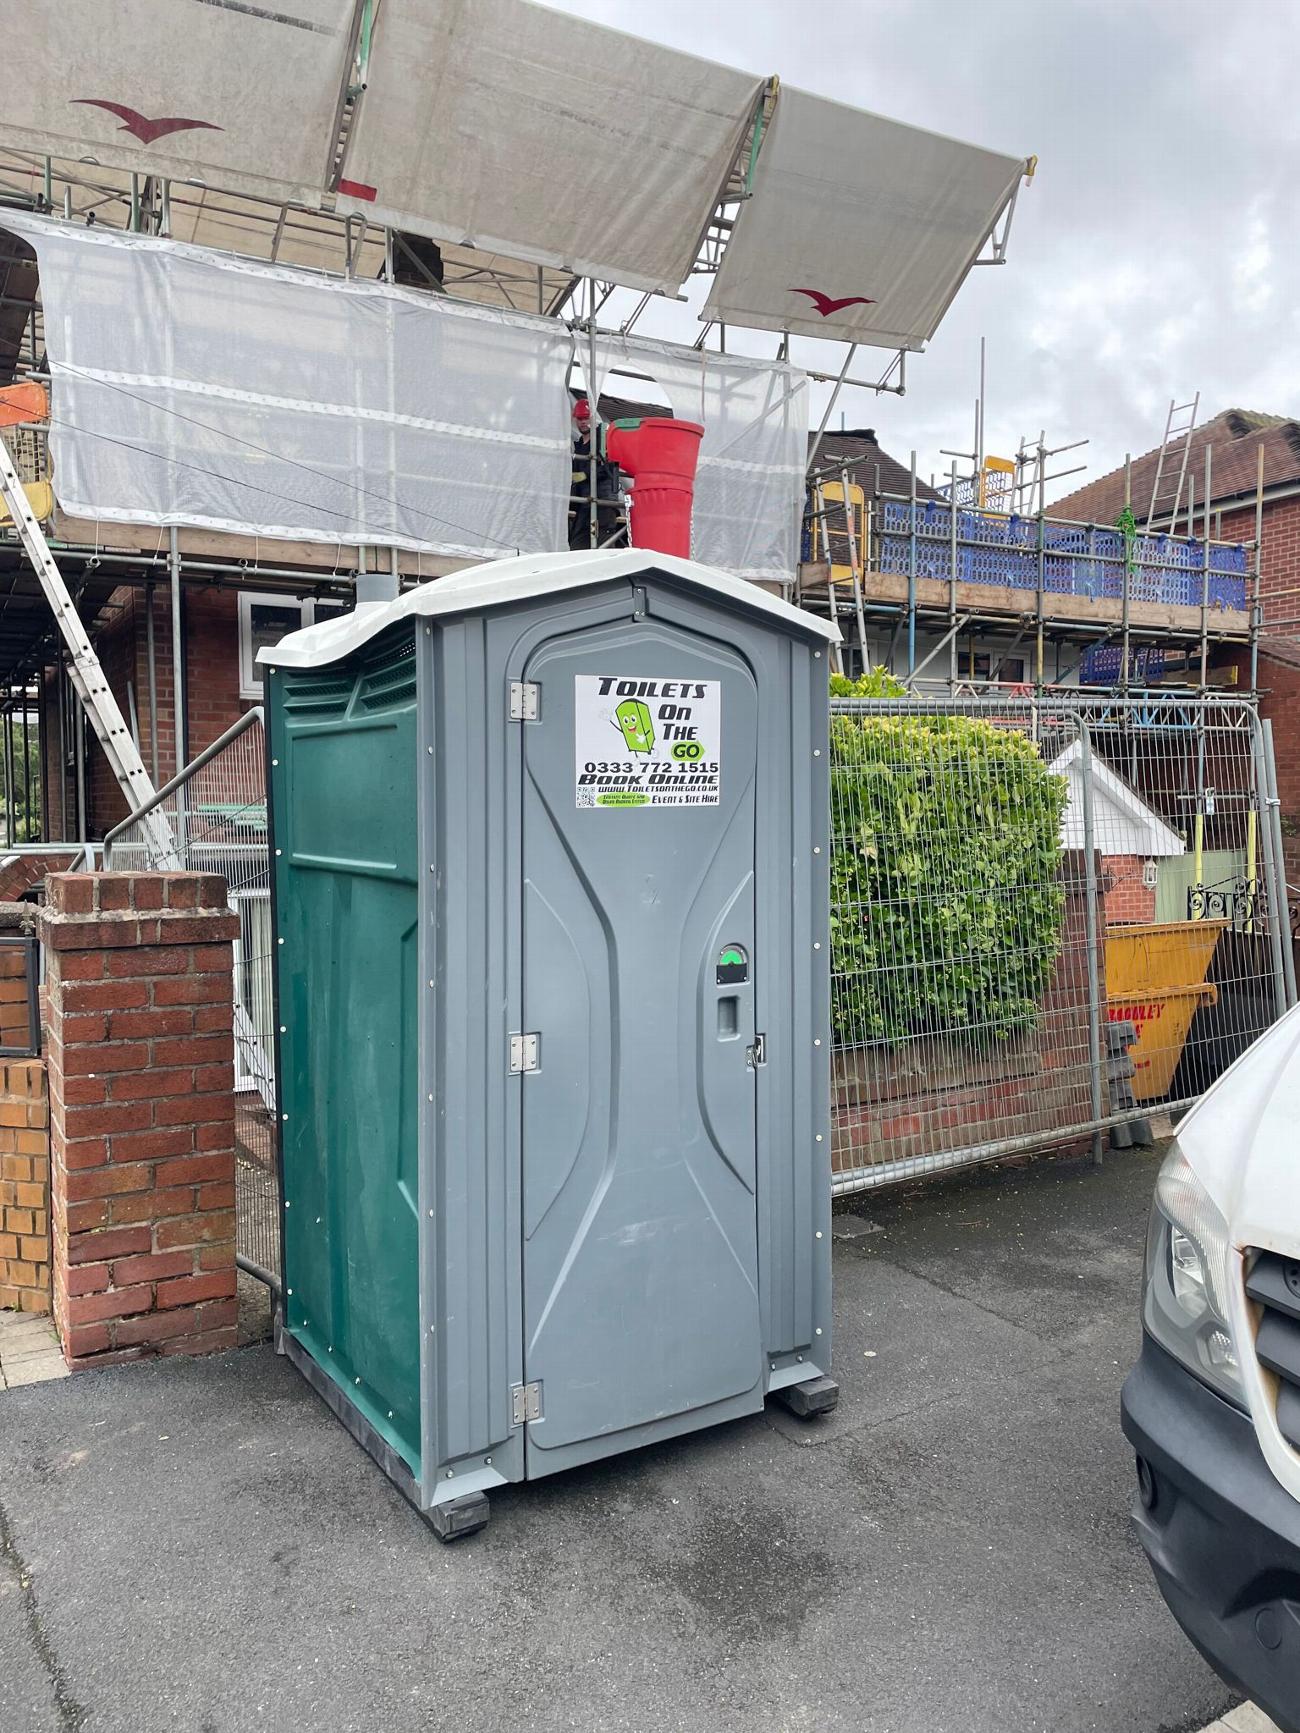 Gallery | Portable Toilet Loo Hire Rental Company in North West uk and Manchester gallery image 67